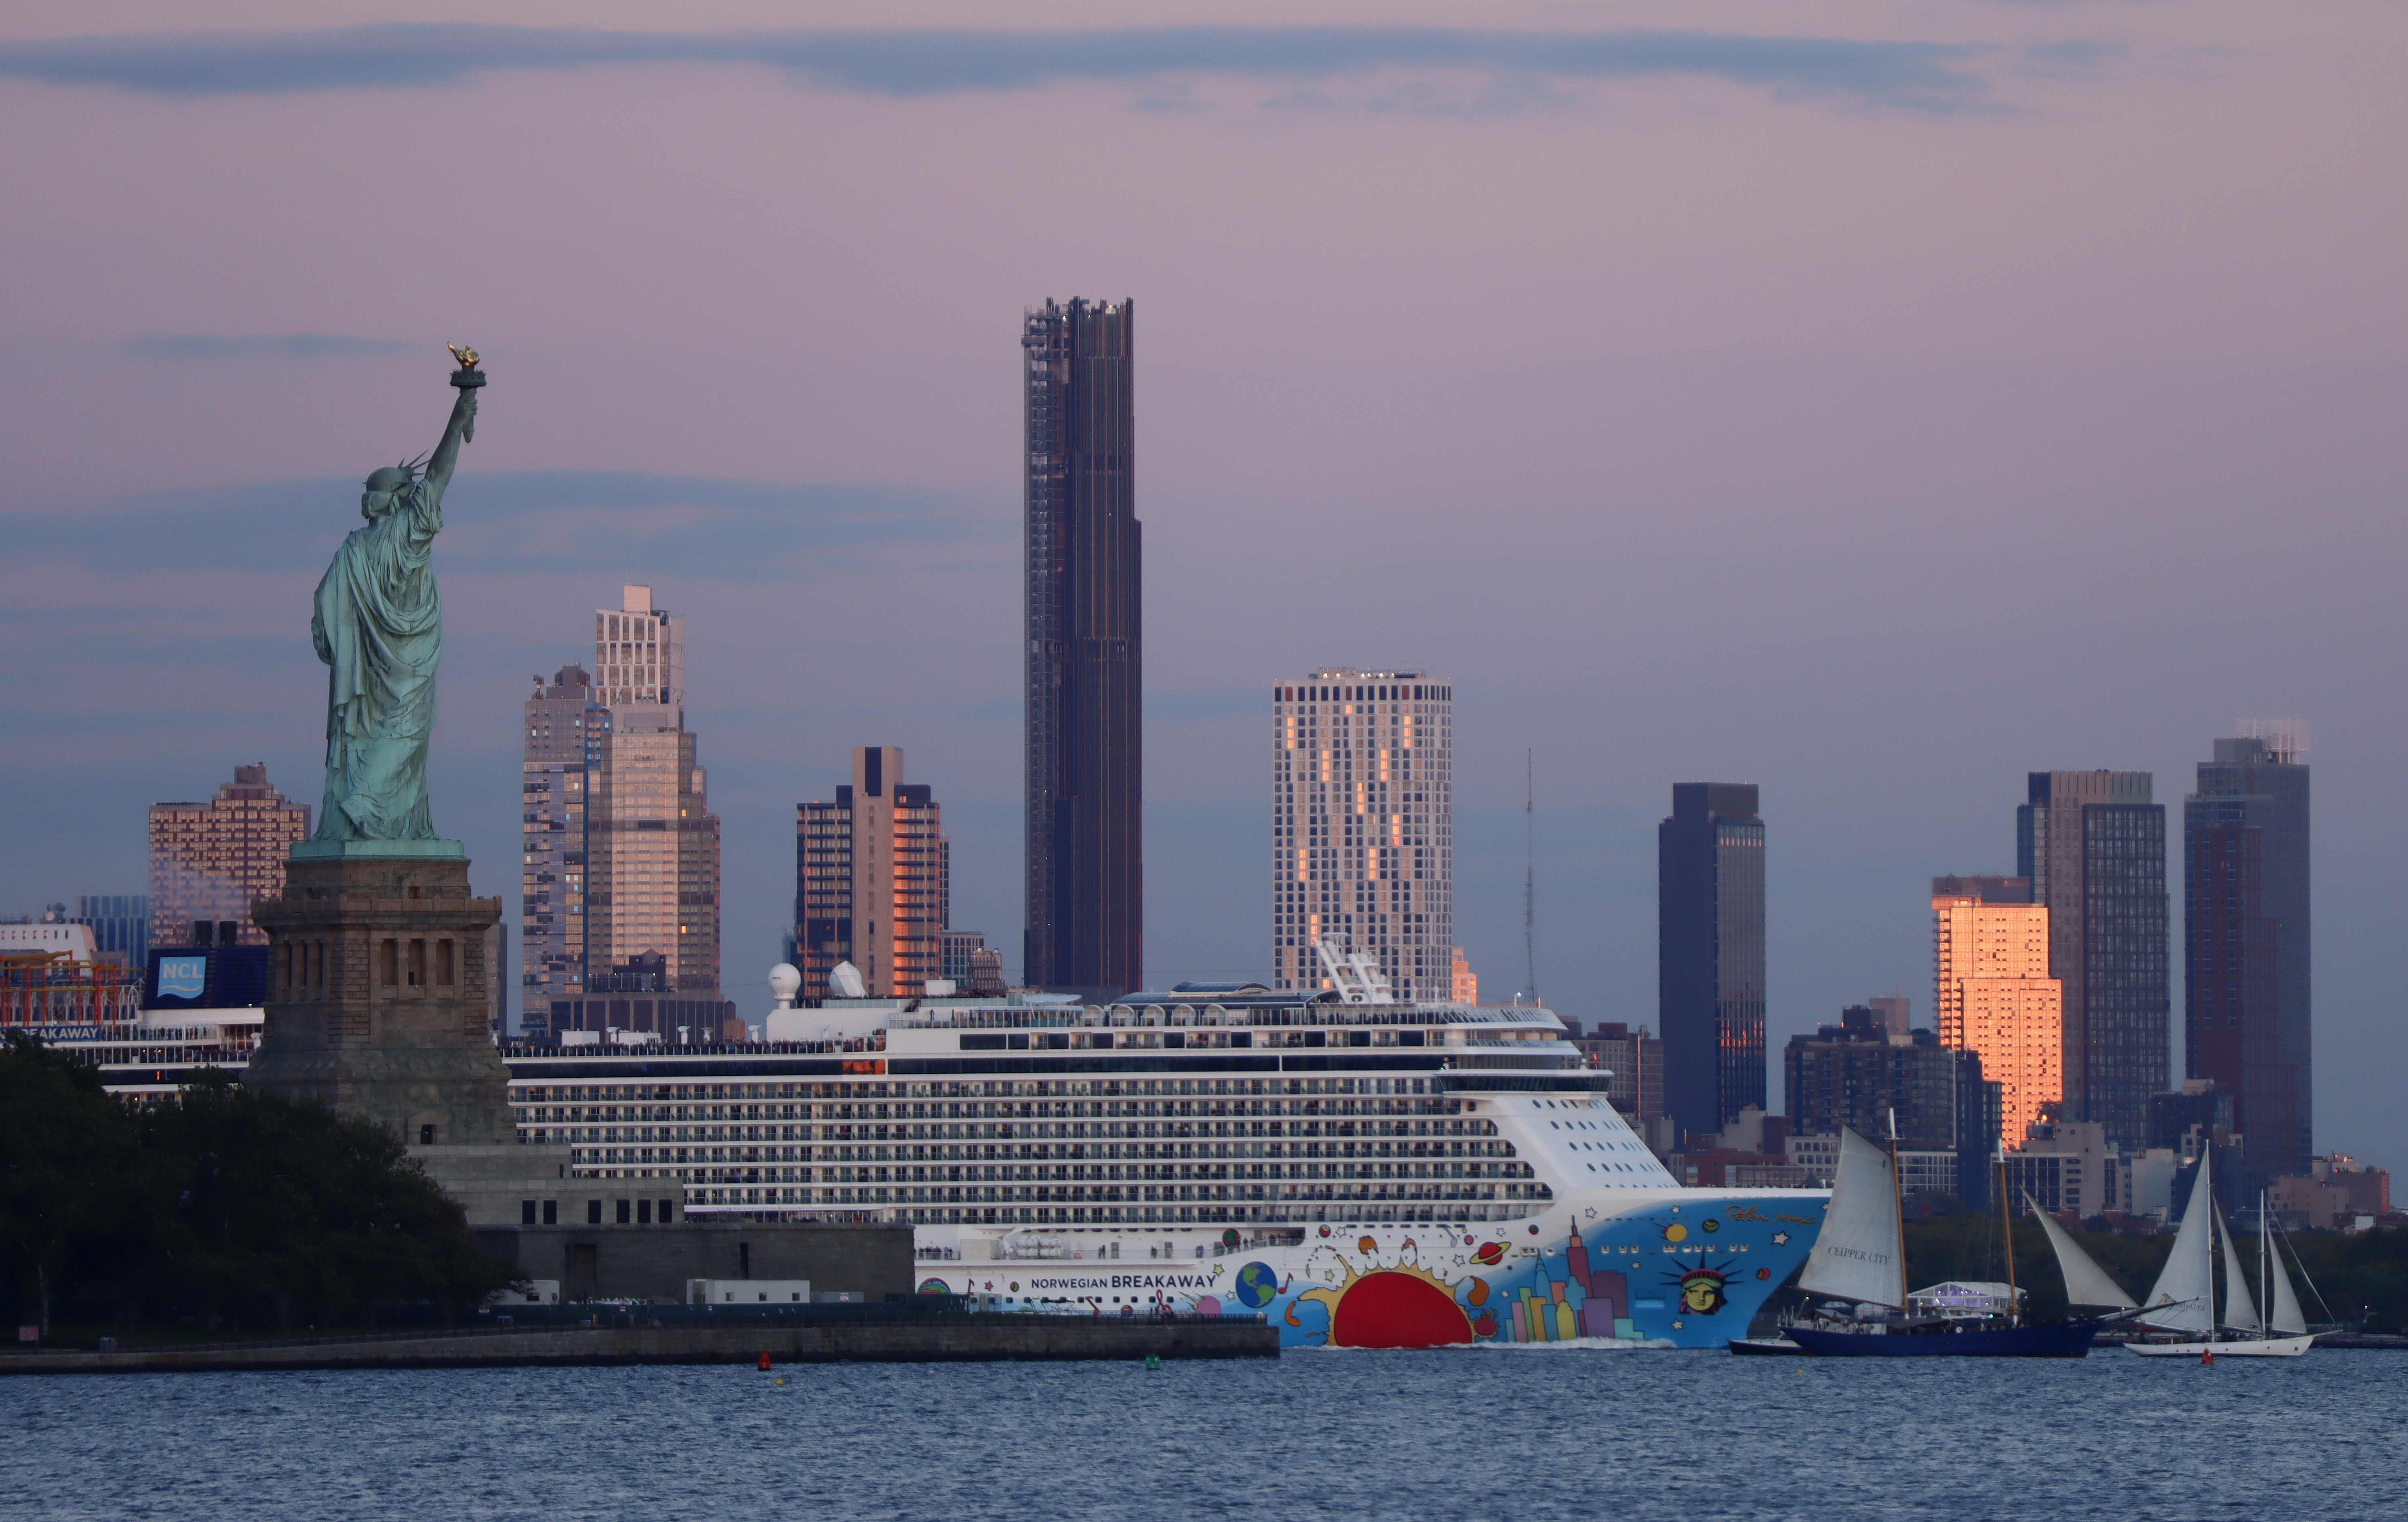 The Norwegian Breakaway cruise ship sails between the Statue of Liberty and the Brooklyn Tower as the sun sets in New York City on Oct. 9, 2022.